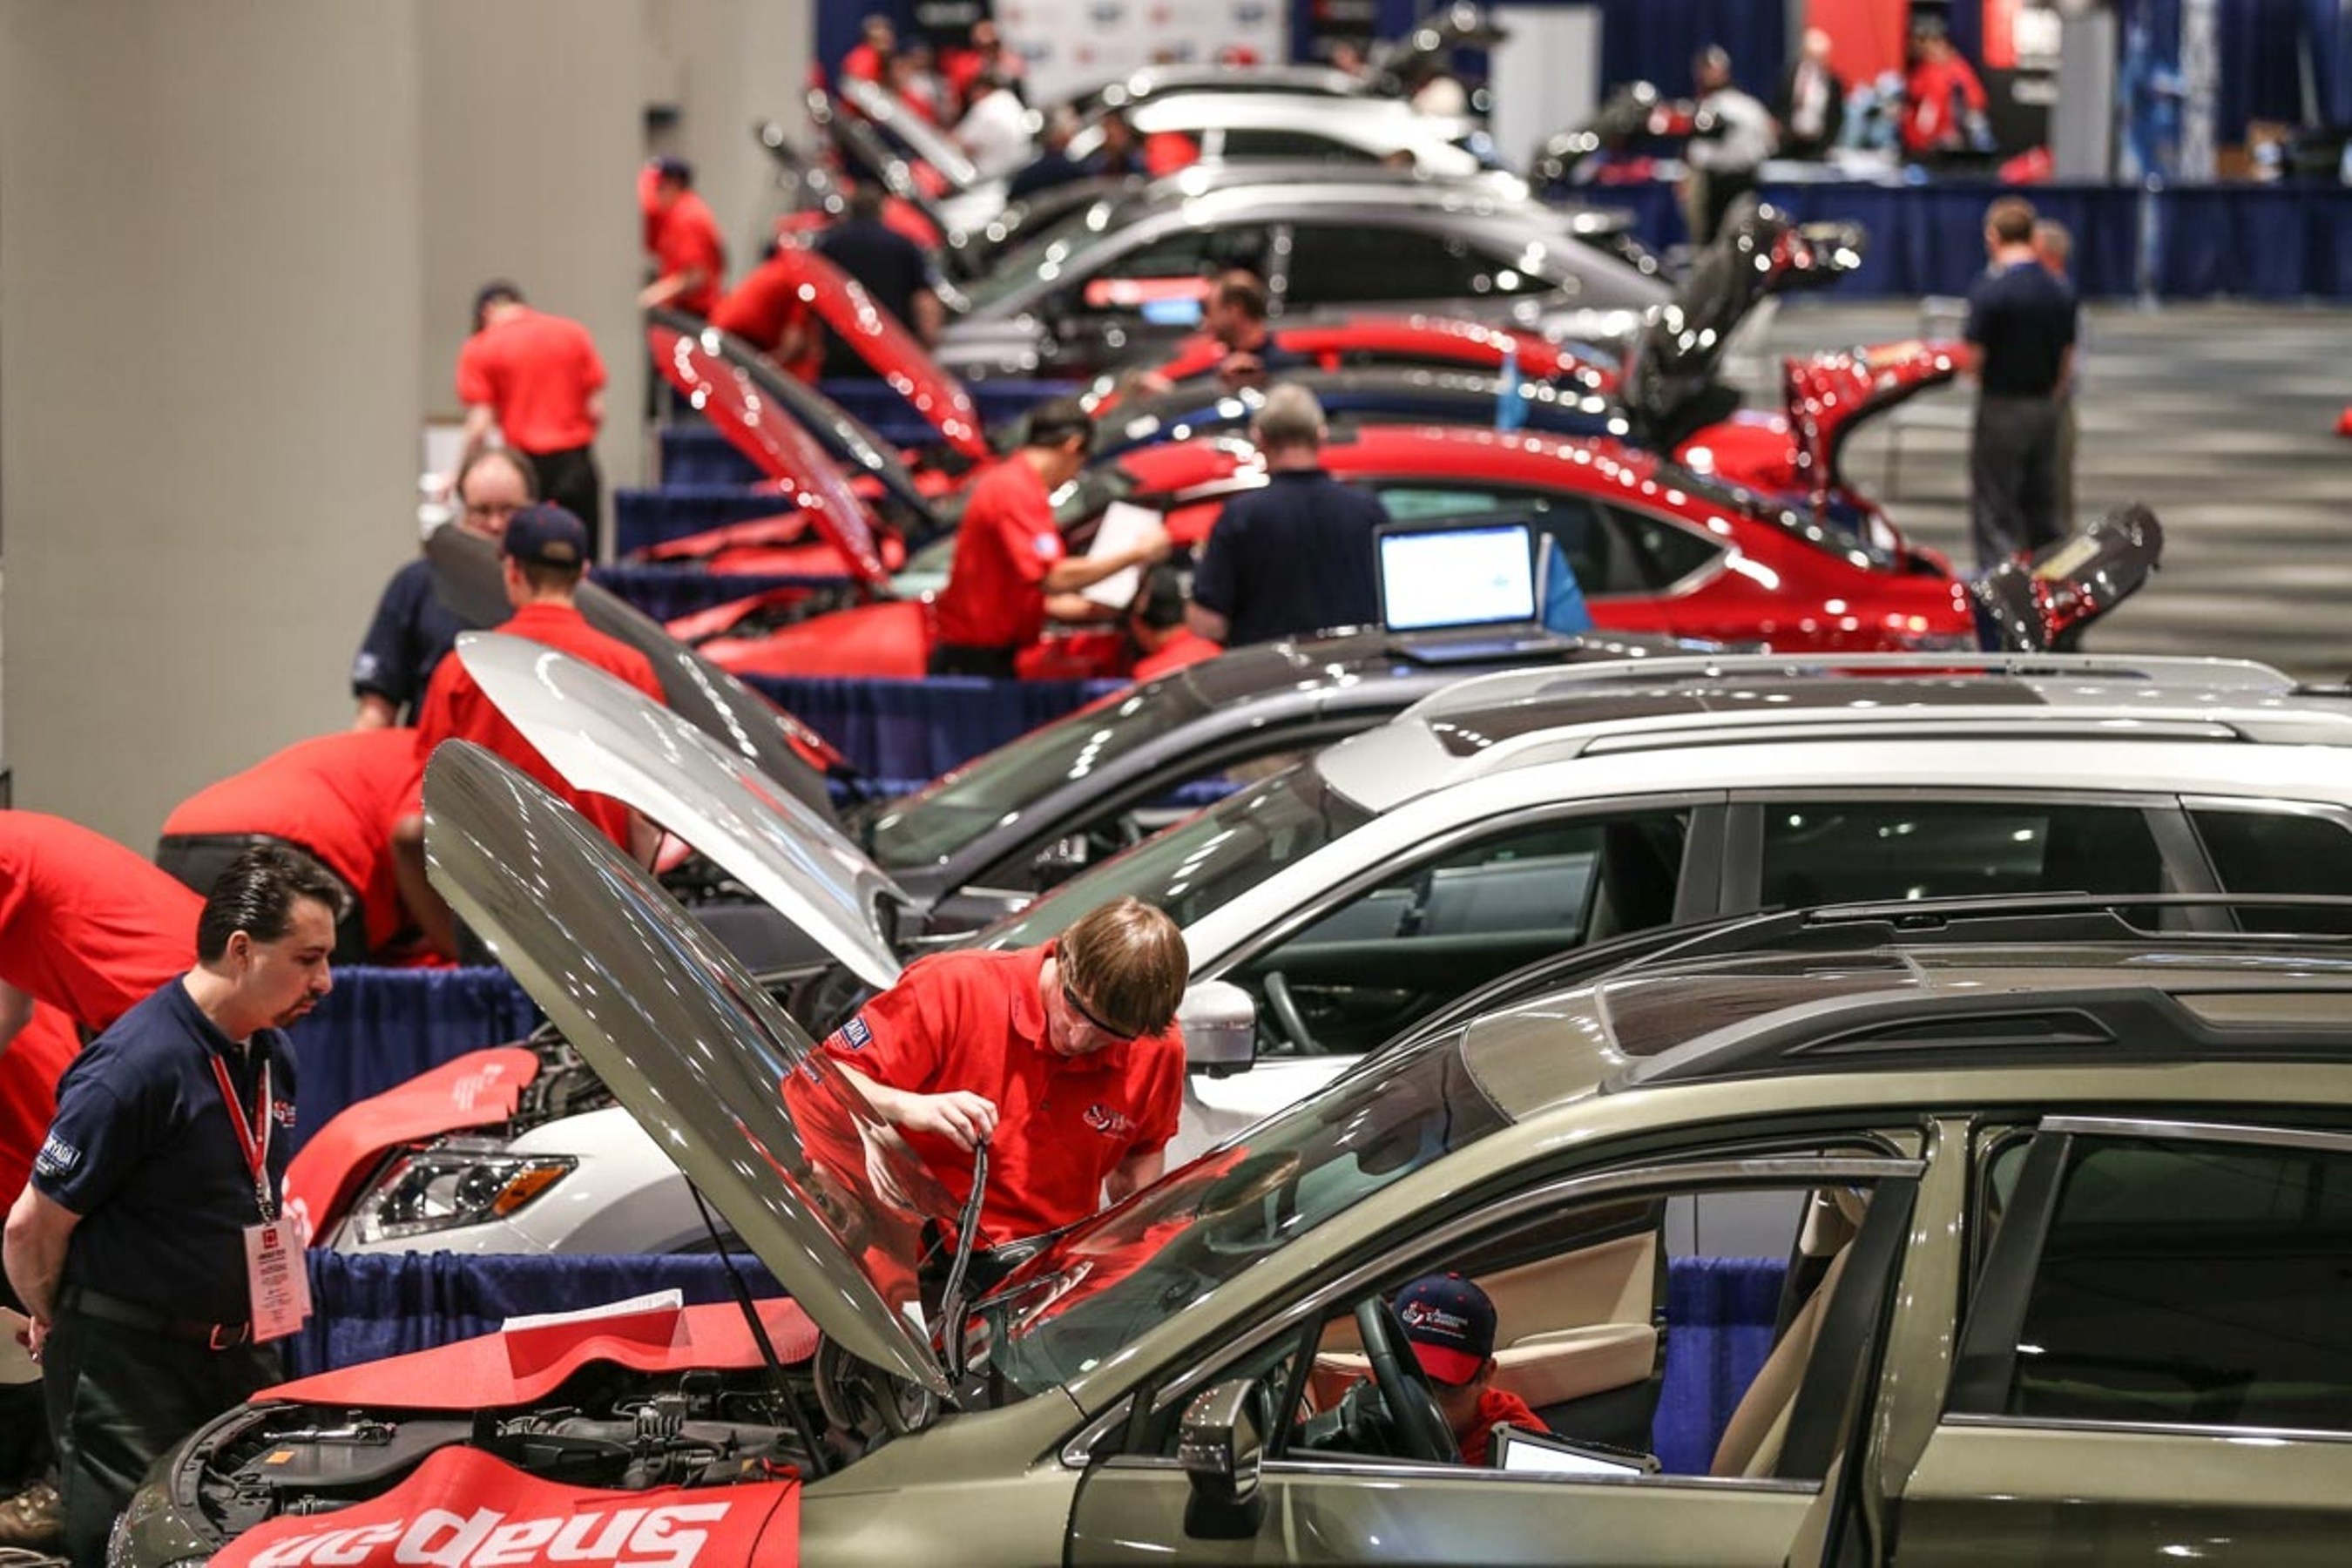 High school students from across the country compete to become America's Top Technician at the 2015 National Automotive Technology Competition.